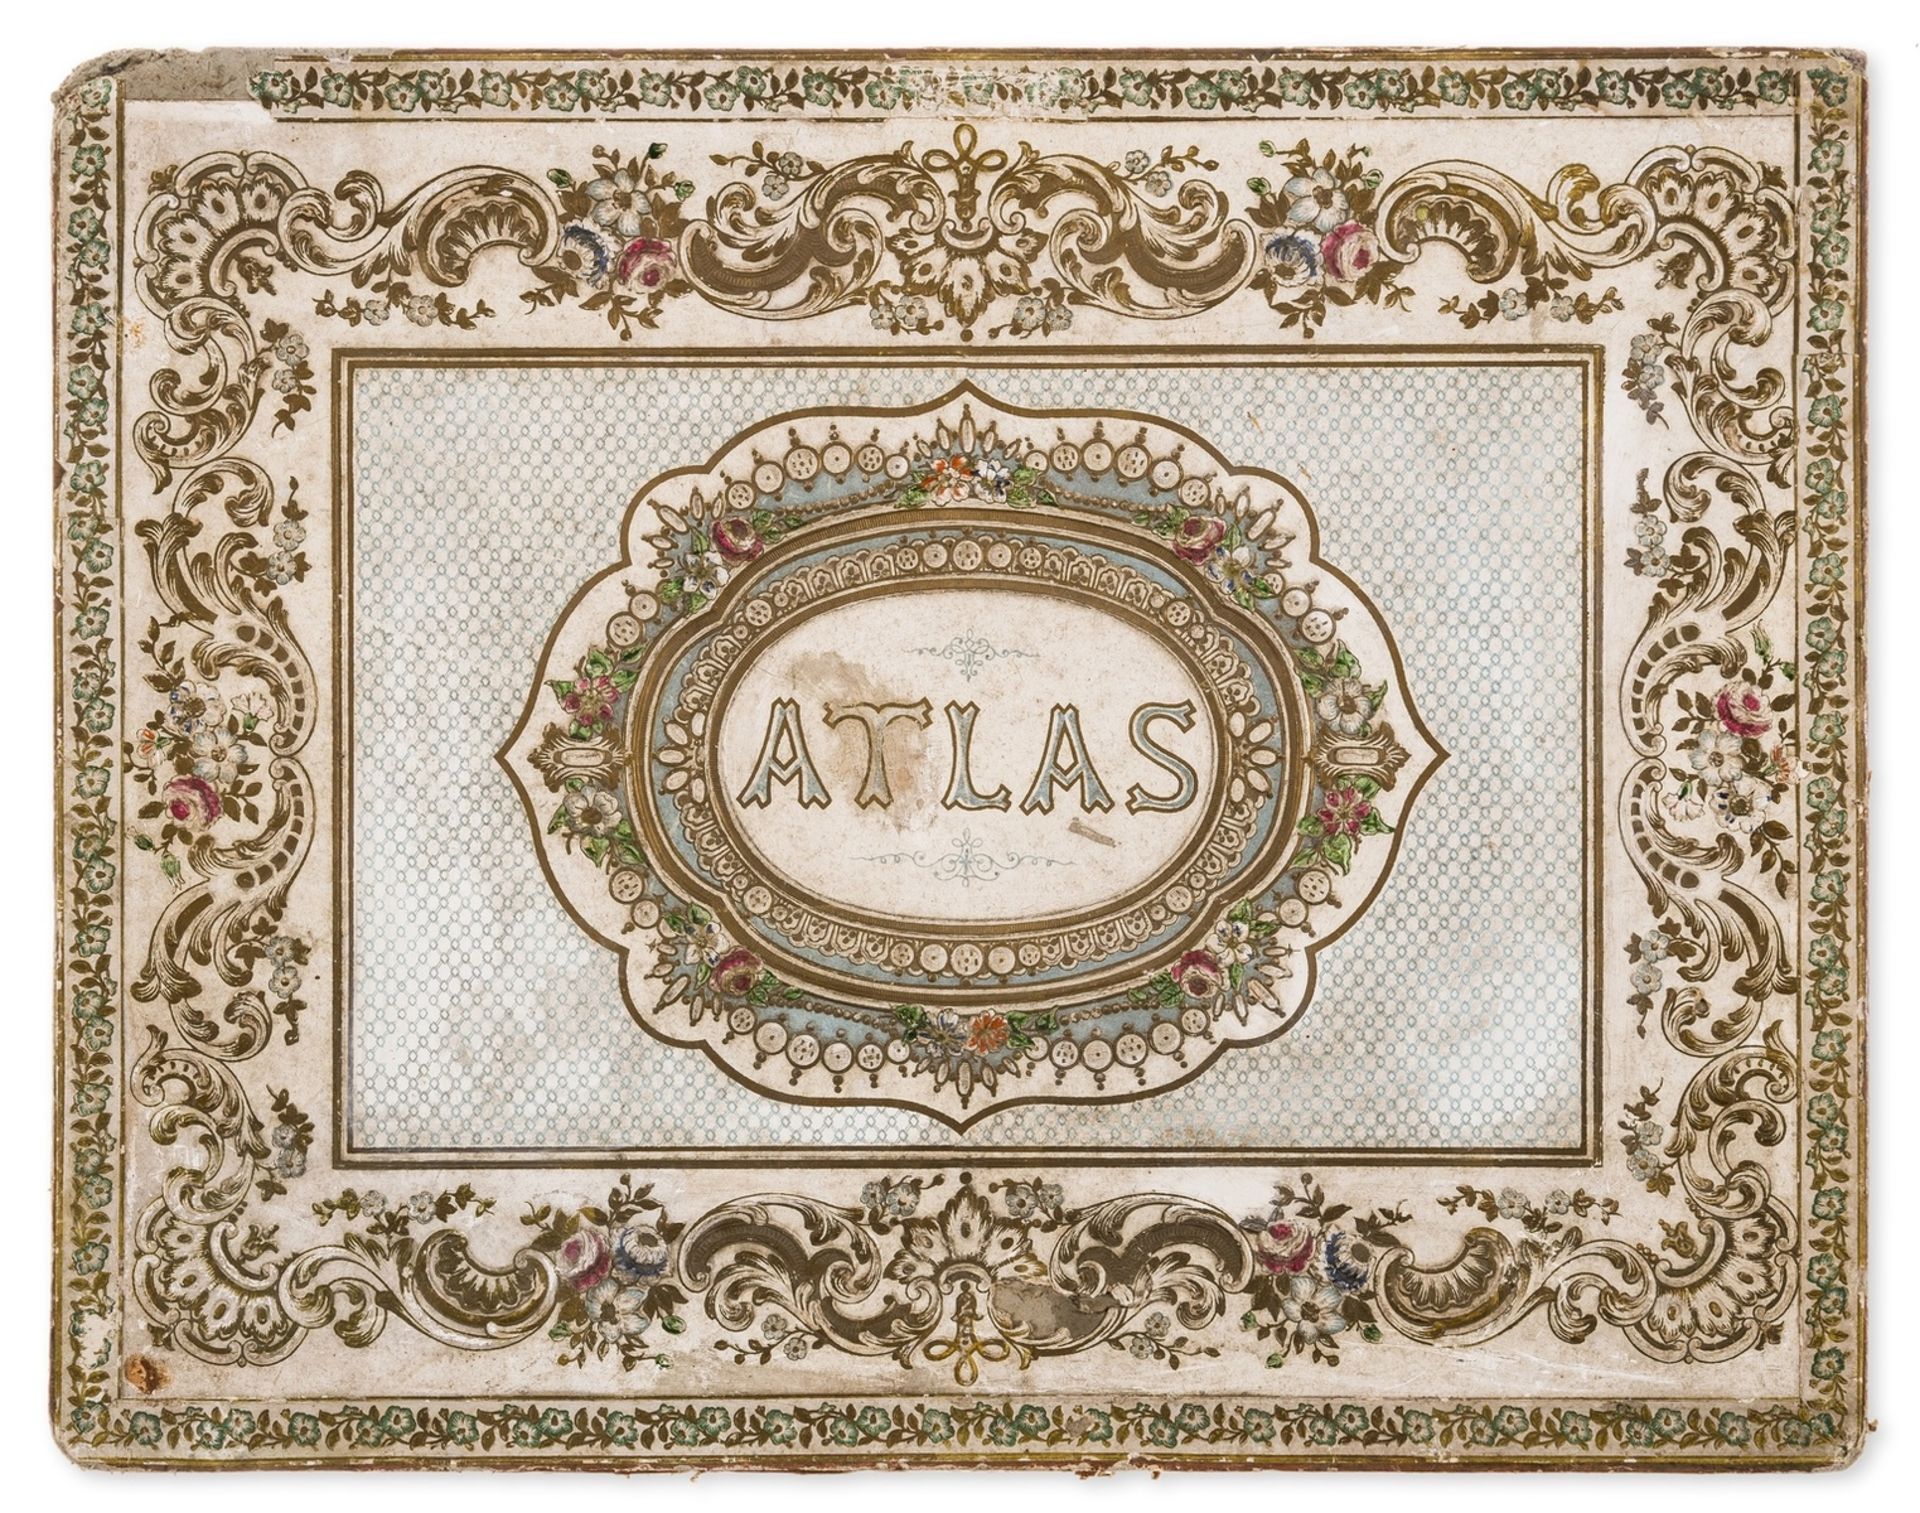 Puzzle Atlas.- Boxed set of eight jigsaw puzzle maps of the world, Paris, [late nineteenth century] - Image 2 of 2